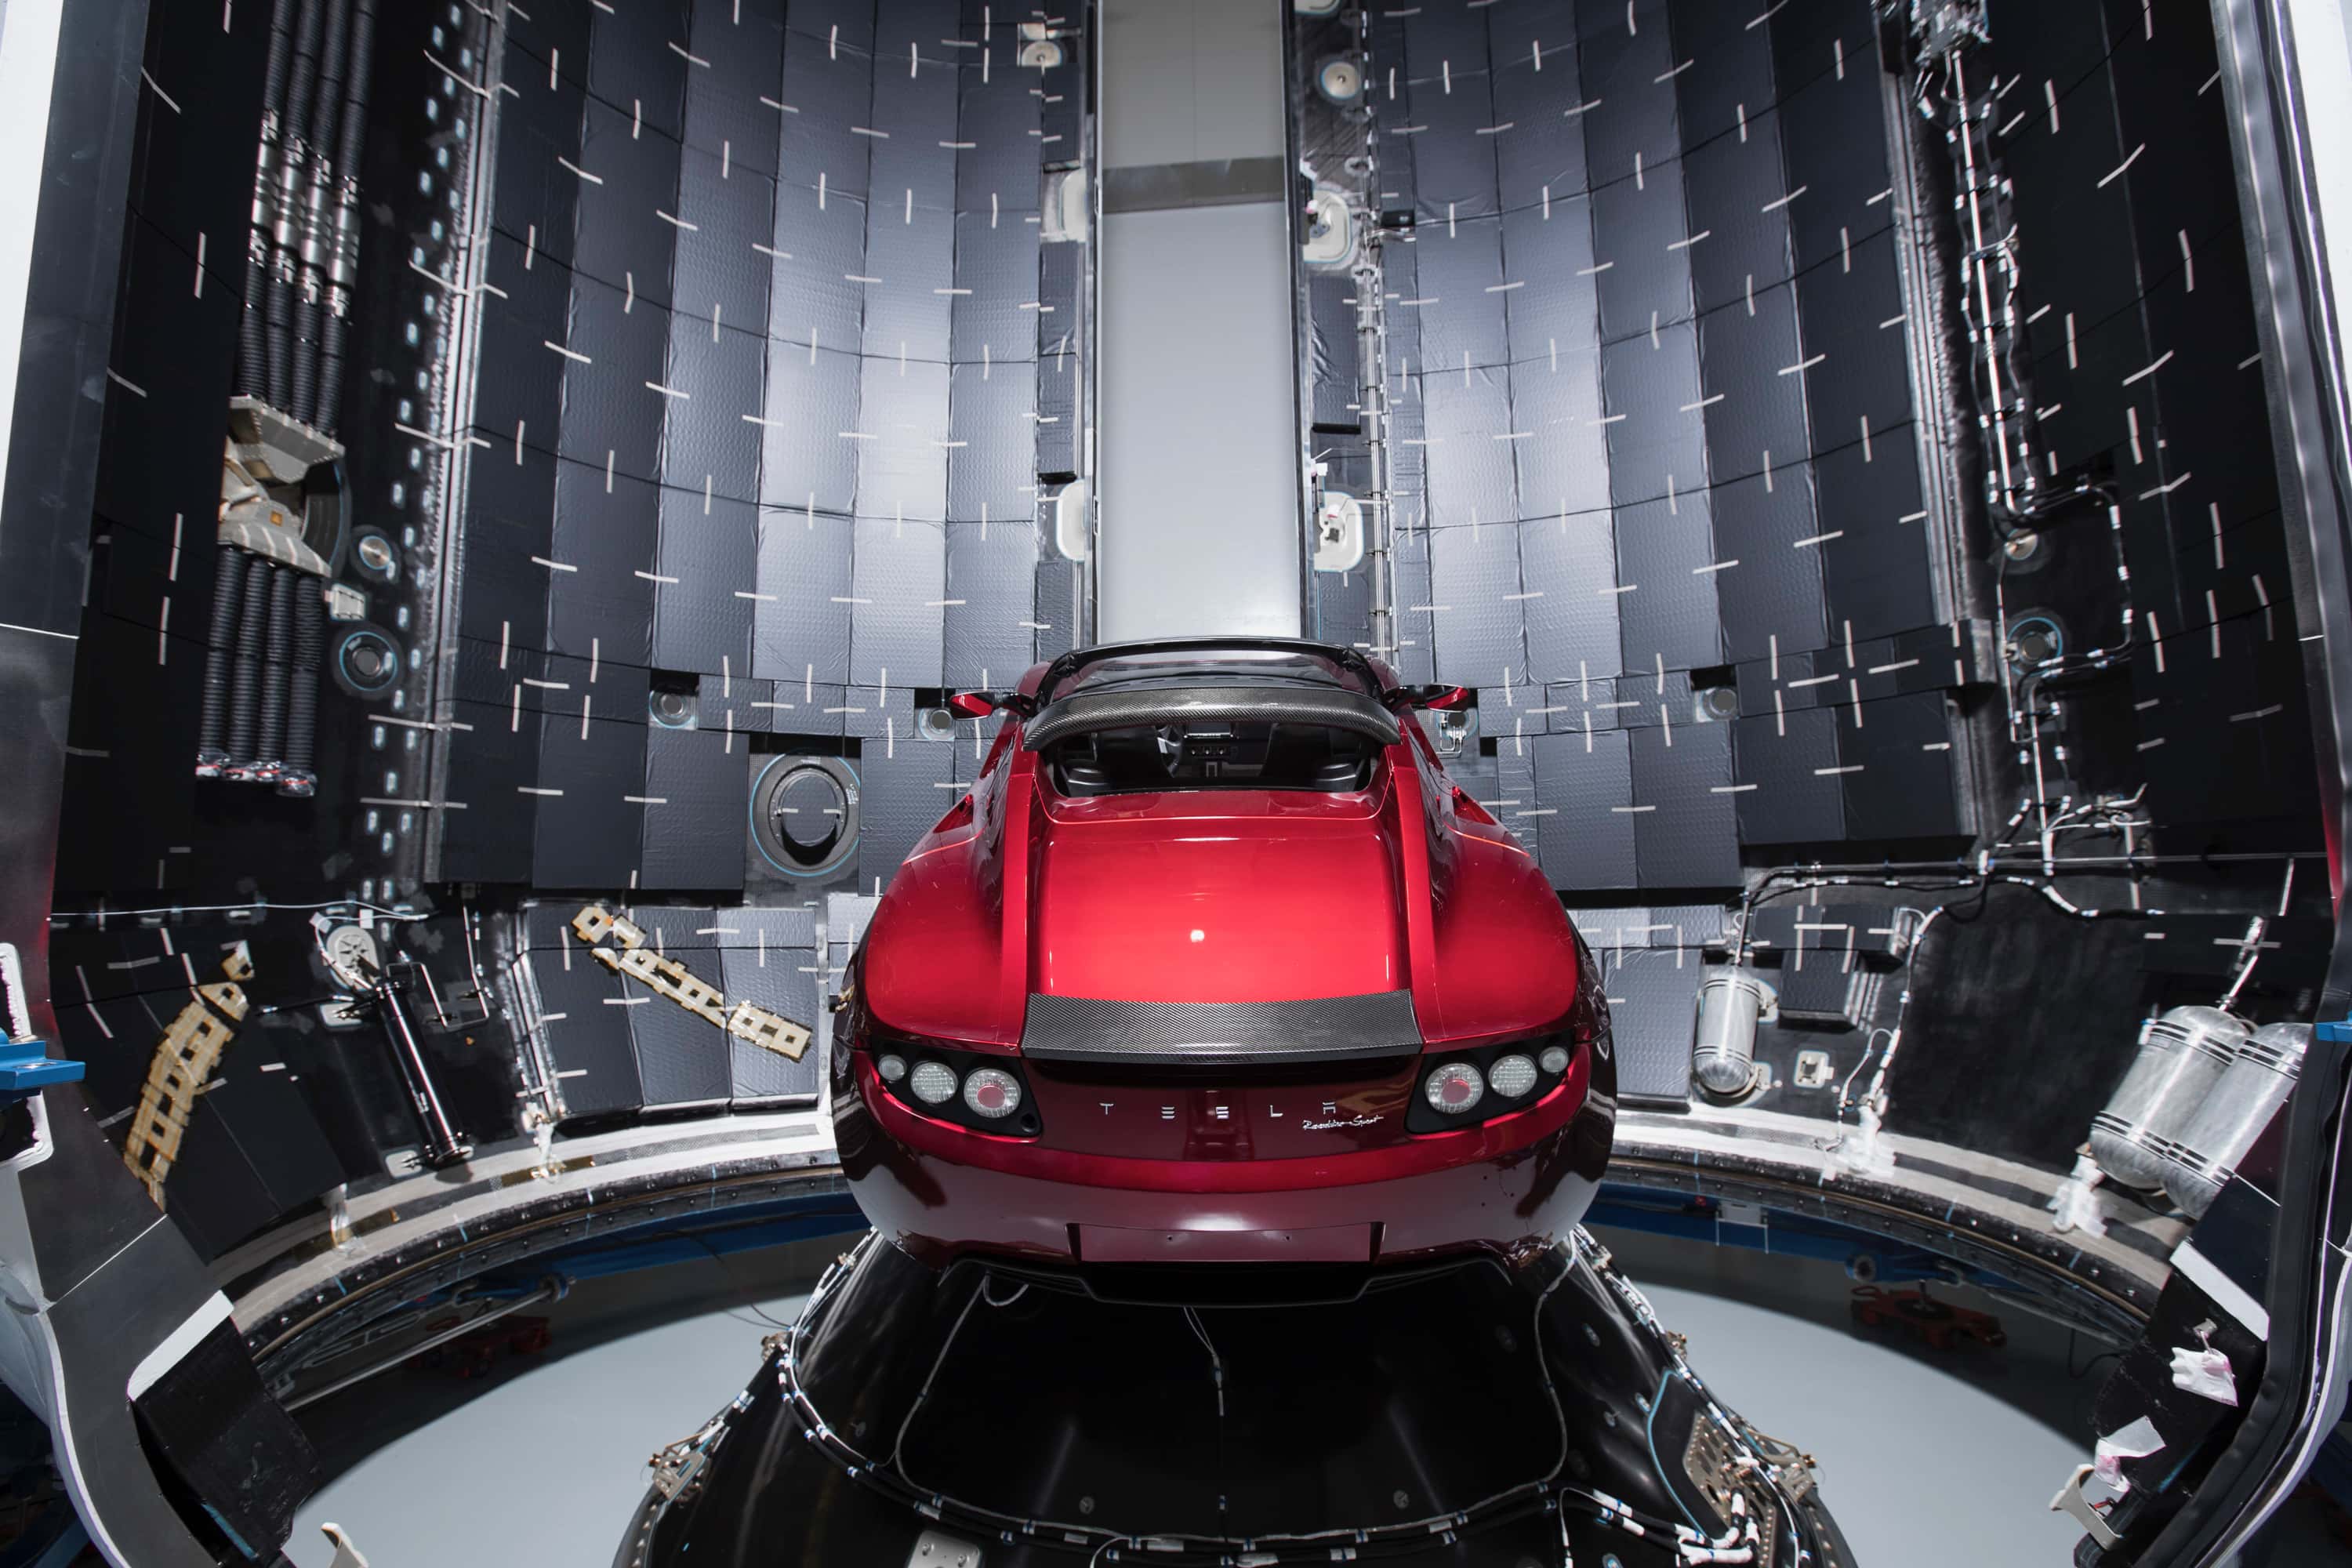 <p>Musk announced on Twitter that a future version of the Tesla Roadster will have about 10 small rockets surrounding the vehicle and will outcompete all other gas race cars on the market. The mini-rockets would be used as thrusters that blow cold air behind the vehicle and in front of it to accelerate and to stop. If air blew out the sides it could even assist in turning. Considering the Tesla Roadster is already one of the fastest cars in the world, this would be pretty epic.</p>